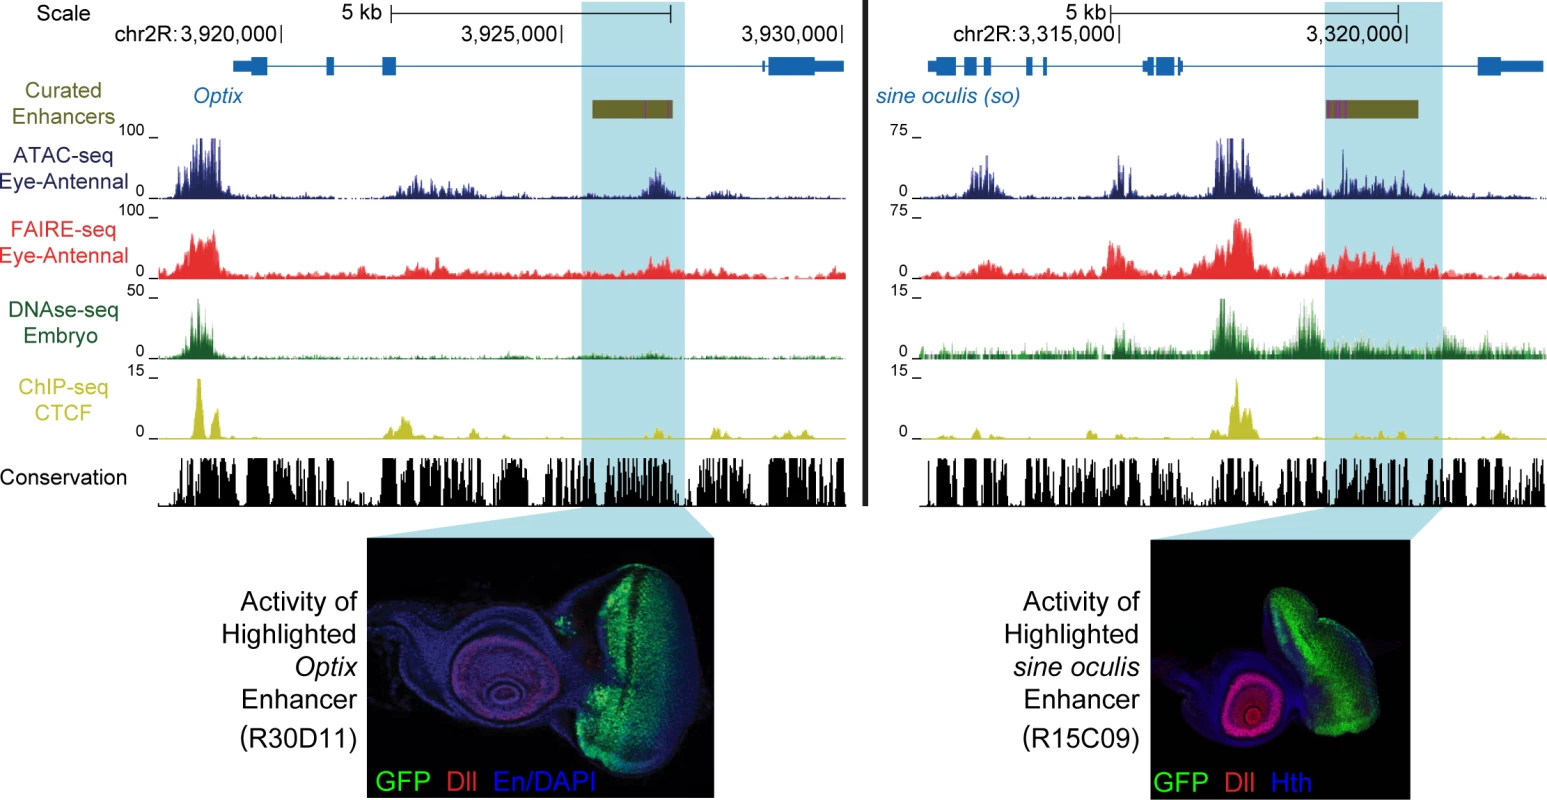 Enhancer identification in the eye primordium by ATAC-seq and FAIRE-seq.